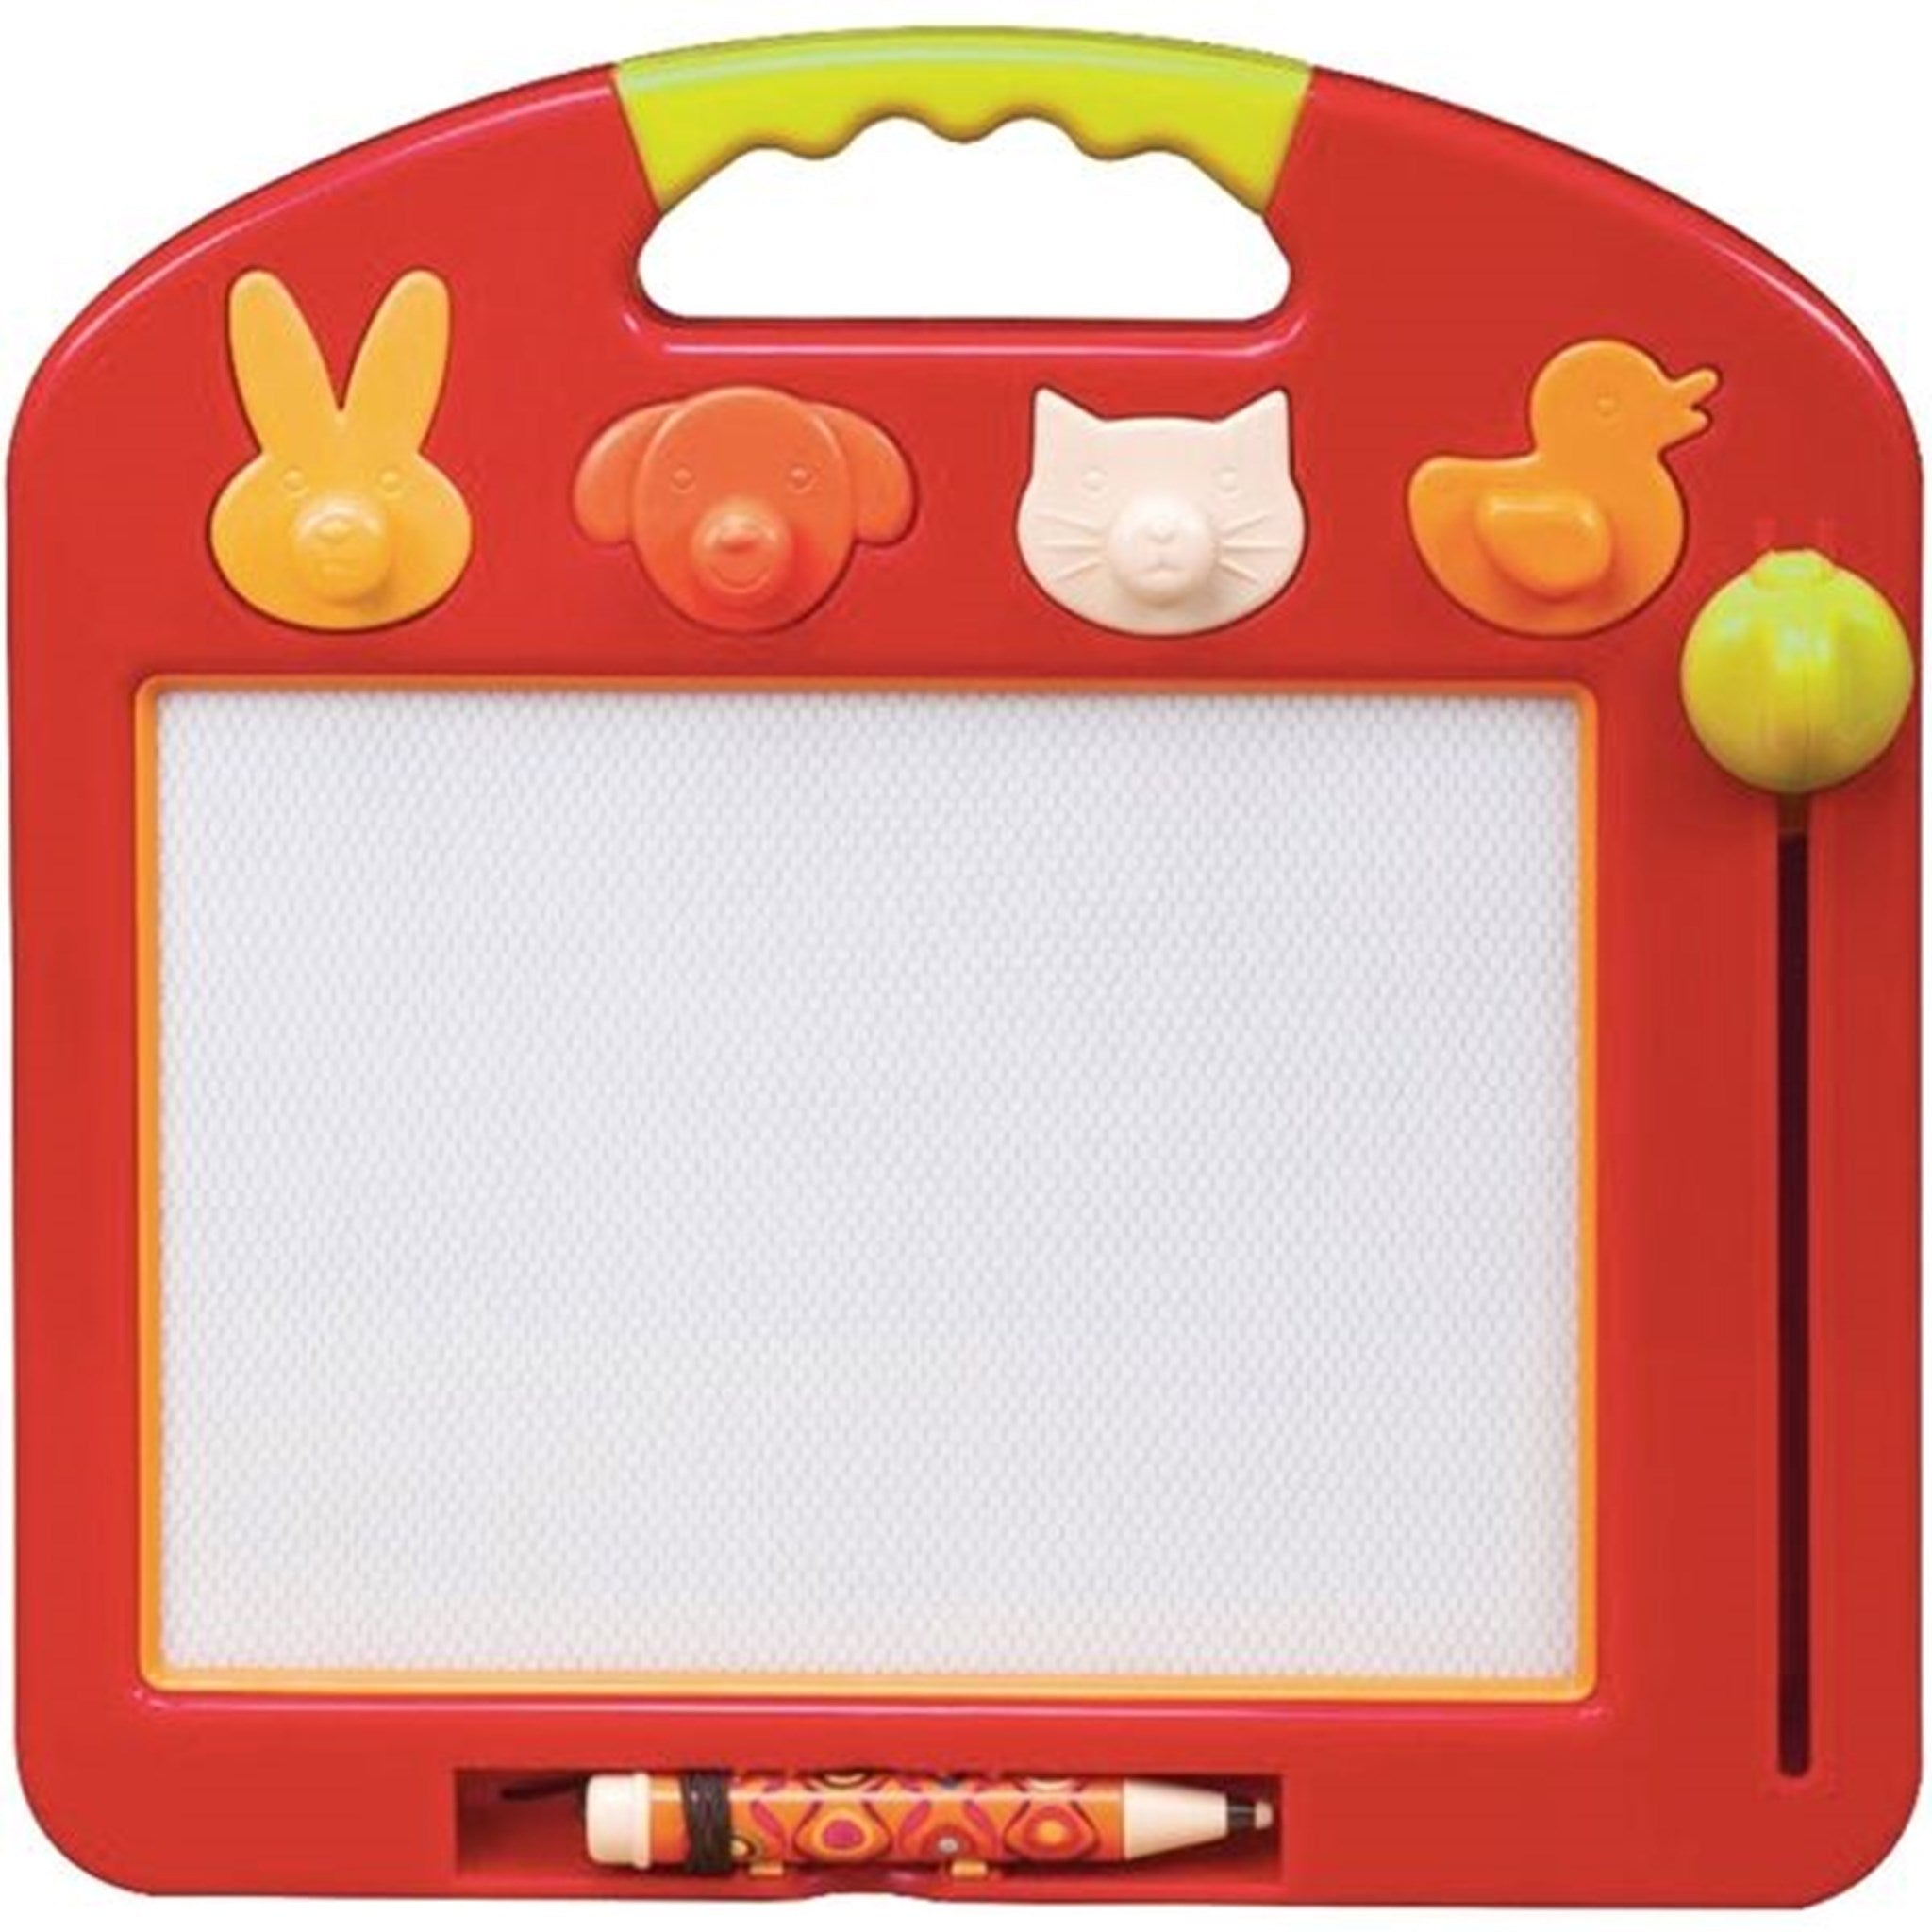 B-toys Magnetic Drawing Board